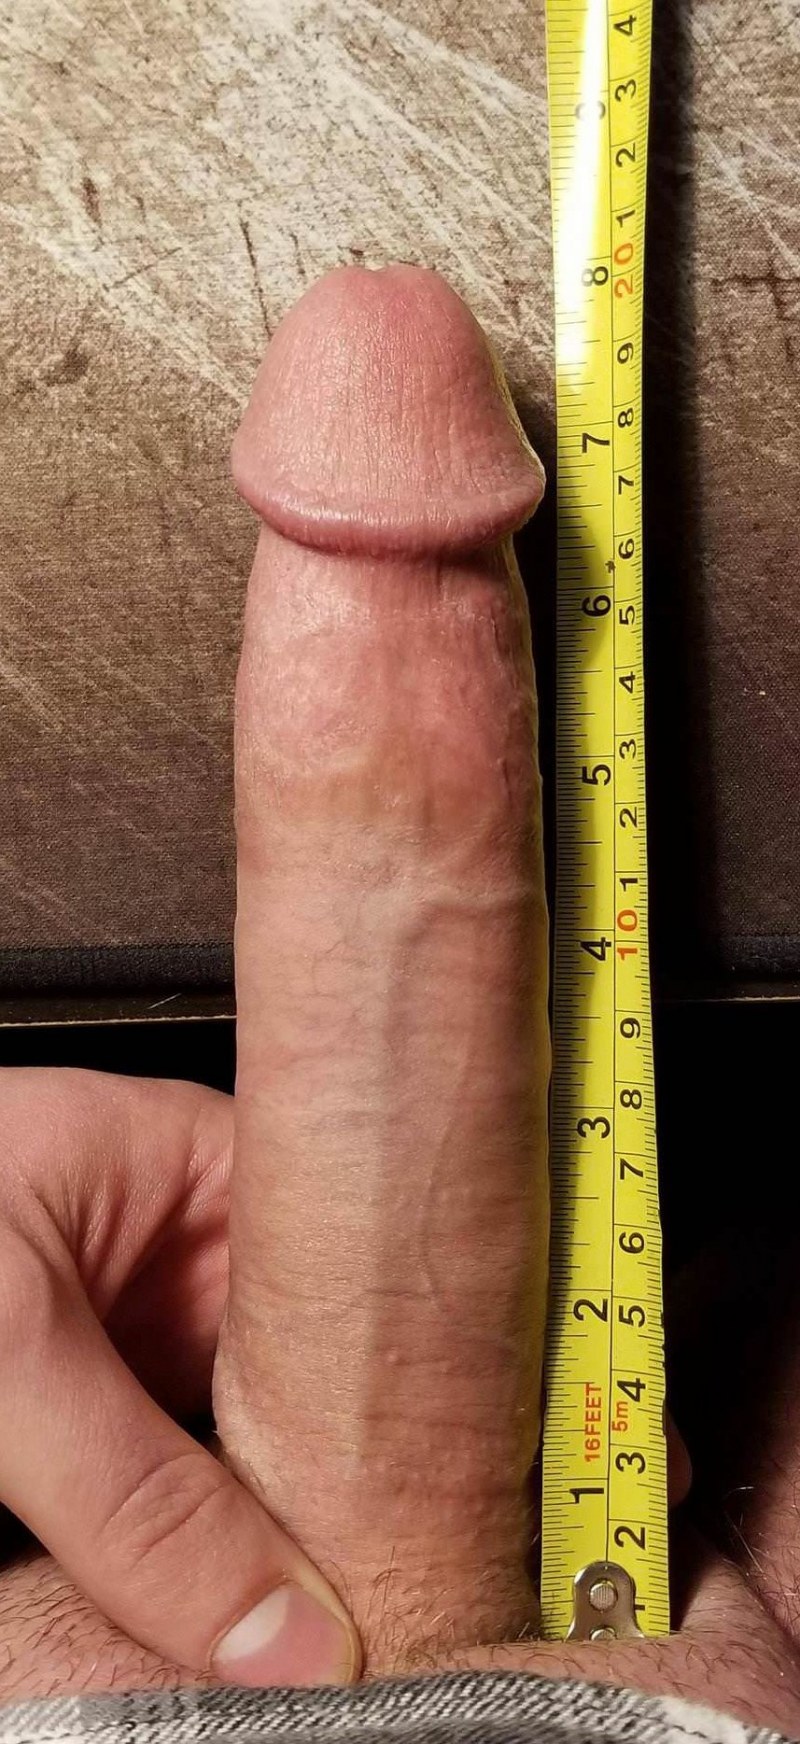 8.2 inches dick